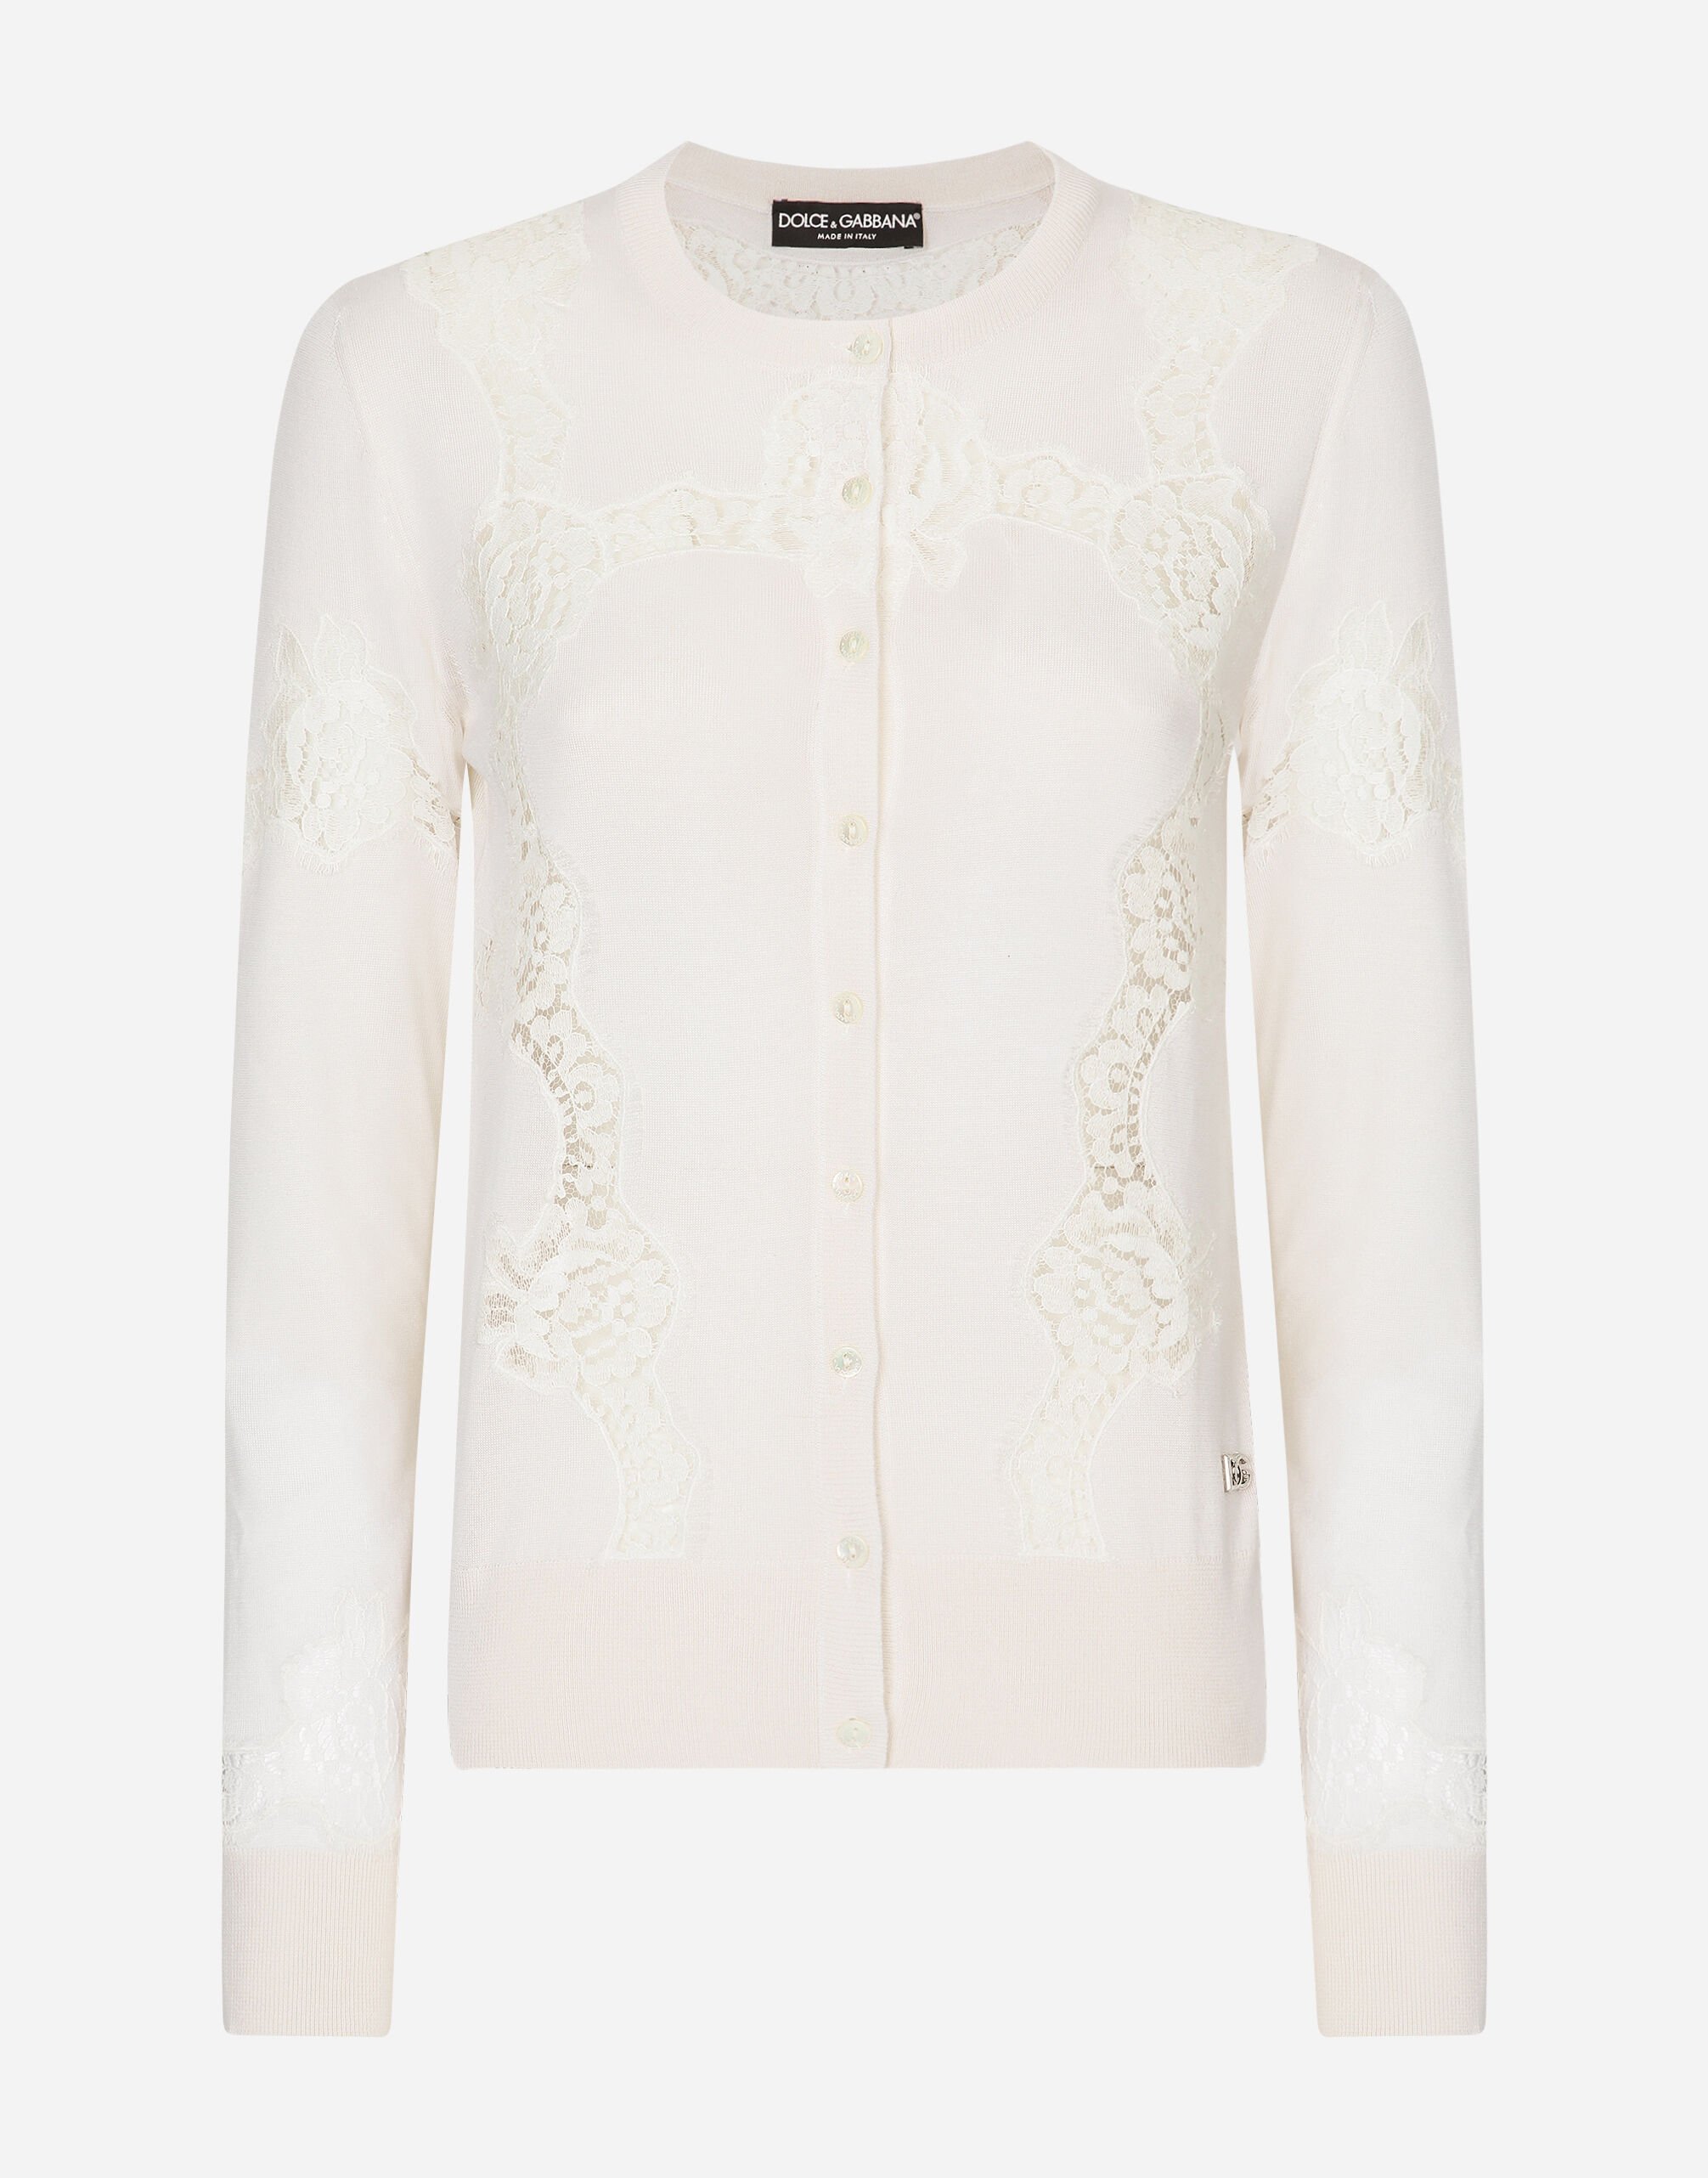 Dolce&Gabbana Cashmere and silk cardigan with lace inlay Gold WBP6C1W1111